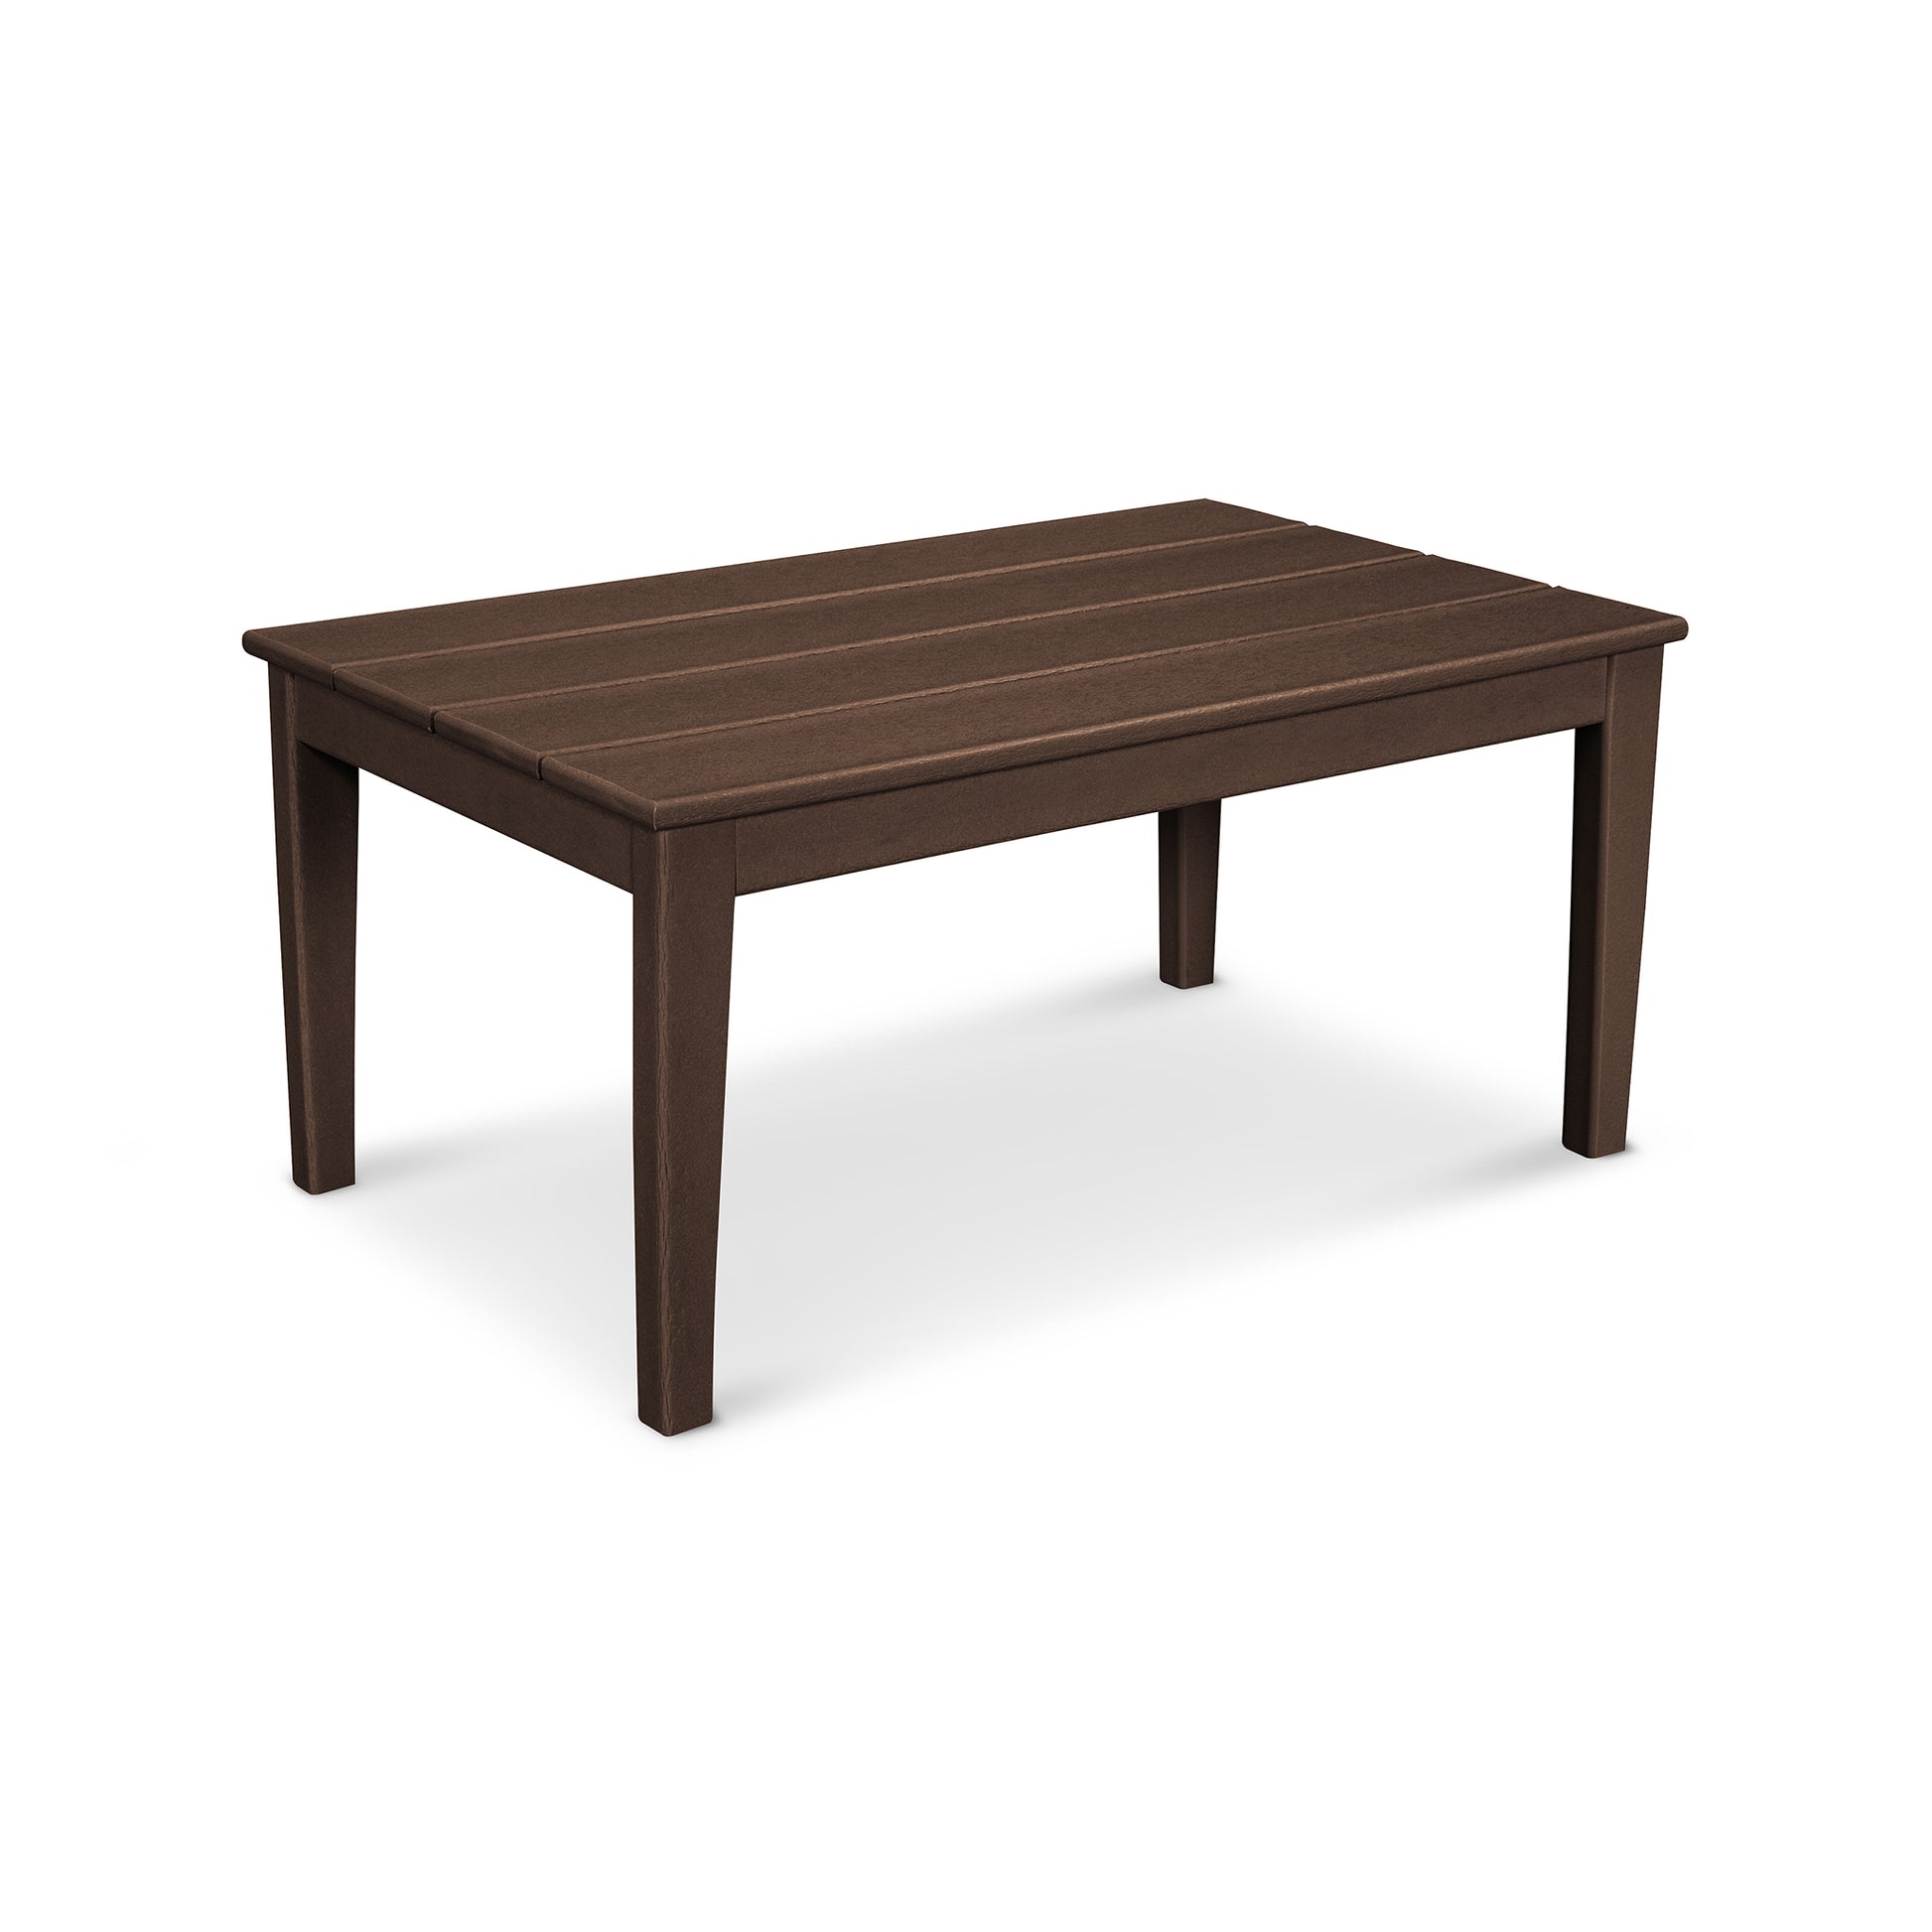 A simple, modern POLYWOOD Newport 22"x36" Coffee Table in brown rectangular shape with four legs, shown against a plain white background. The table's design features clean, straight lines with no visible hardware and is crafted from durable materials.